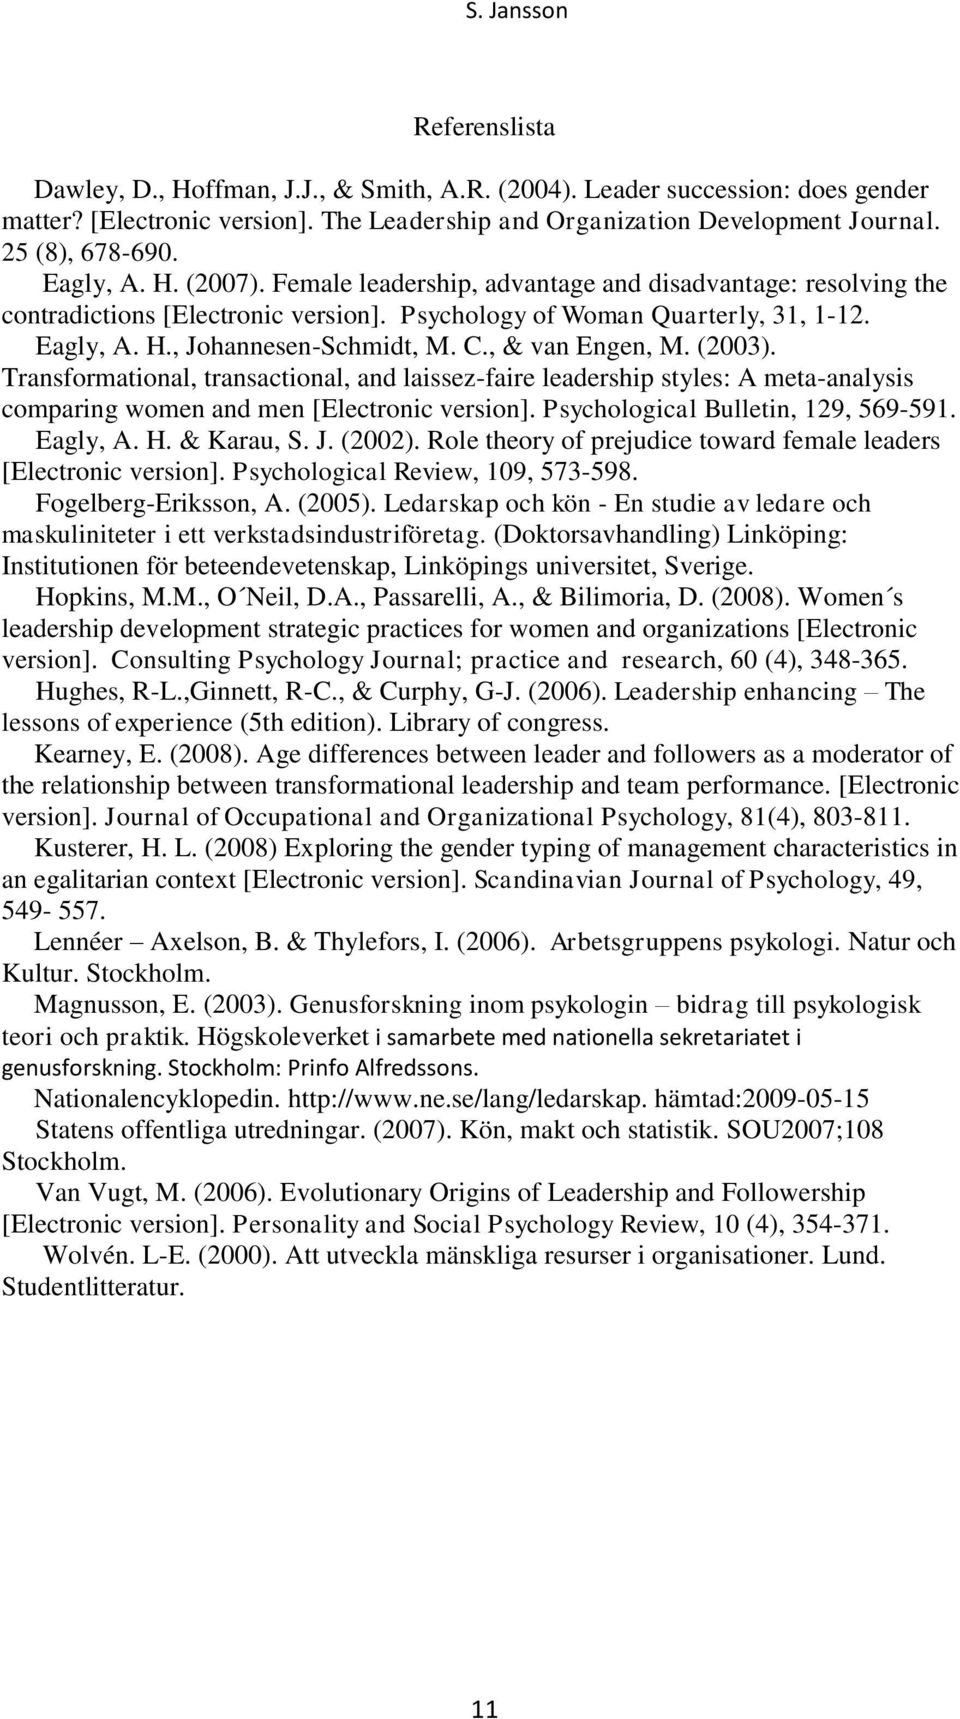 , & van Engen, M. (2003). Transformational, transactional, and laissez-faire leadership styles: A meta-analysis comparing women and men [Electronic version]. Psychological Bulletin, 129, 569-591.